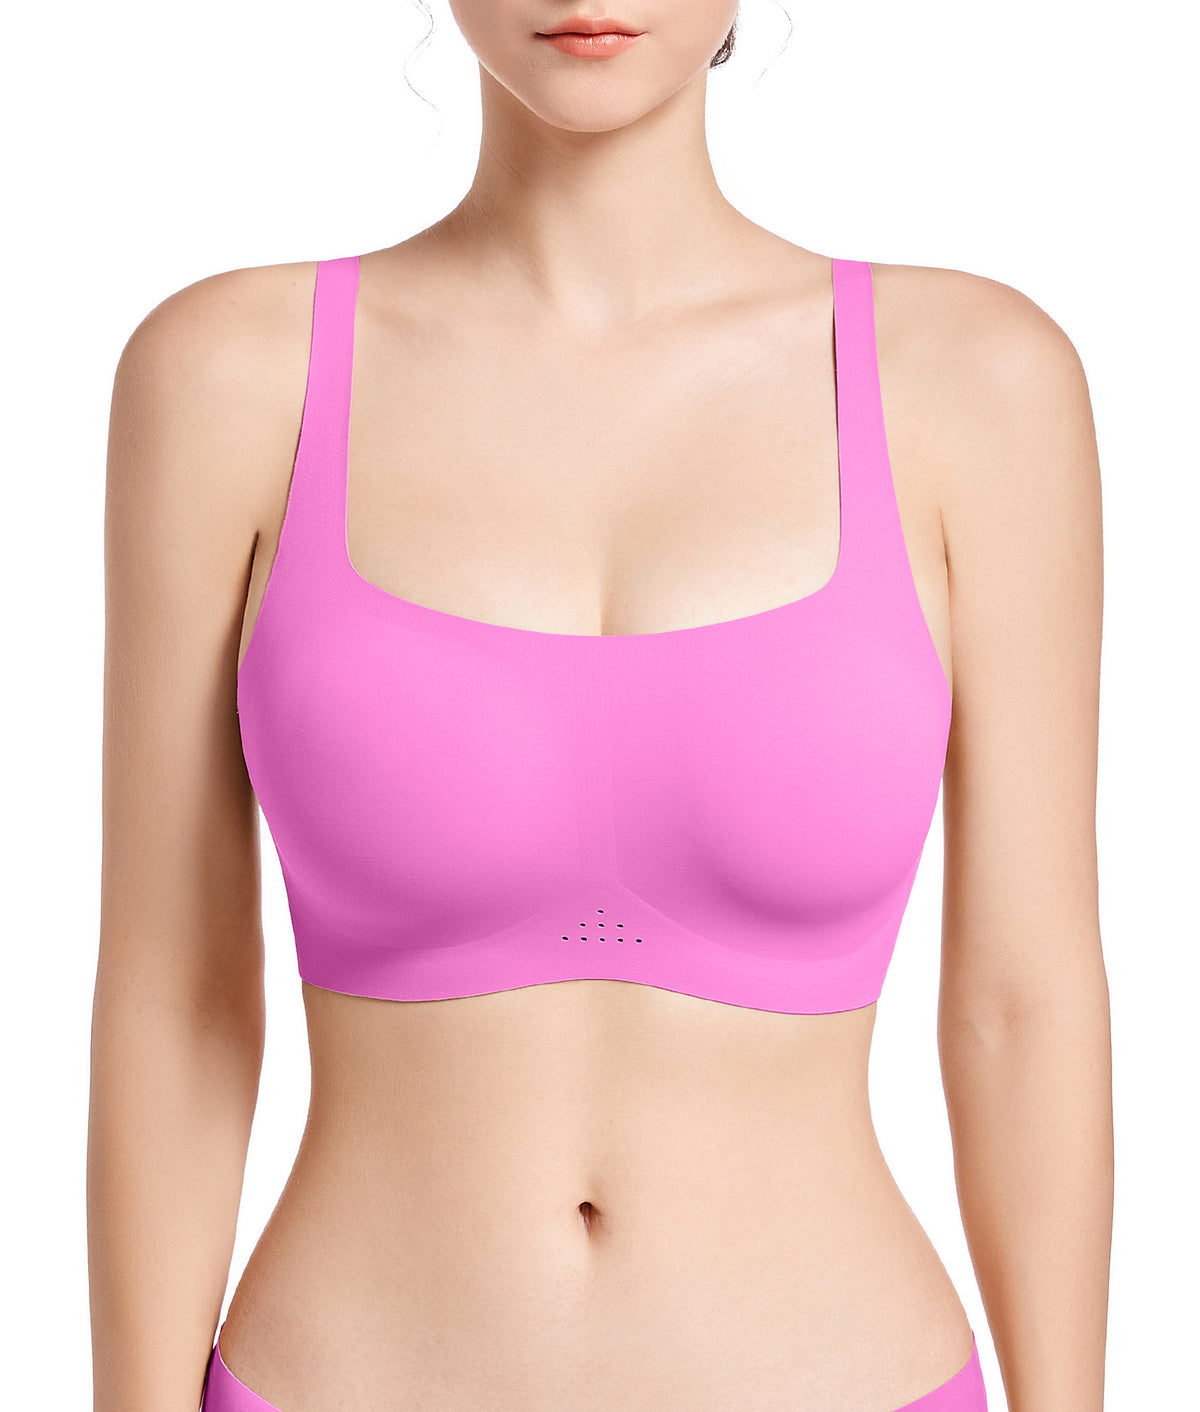 SHAPERX Wireless Scoop Bras for Women Small to Plus Size Everyday Bra with Removable Pads SHAPERX